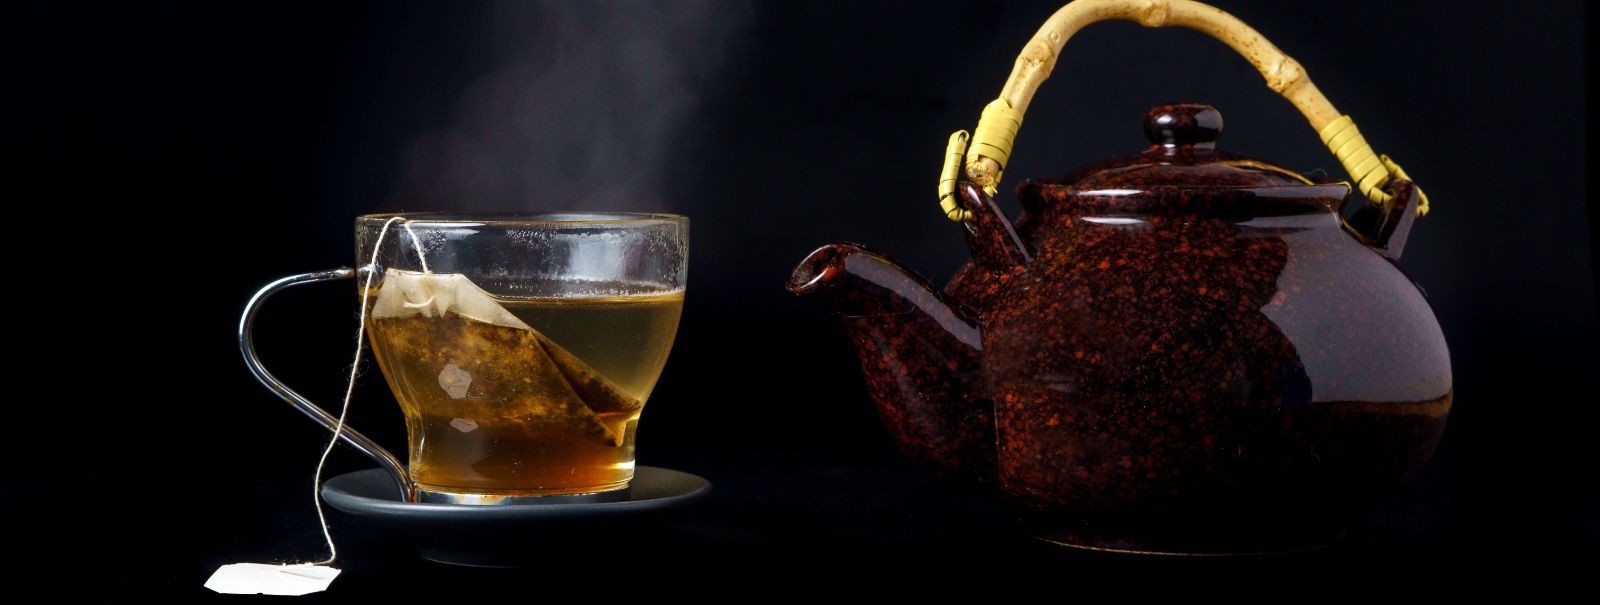 Tea, a beverage cherished by many across the globe, is as varied as the cultures it hails from. Exotic teas, with their unique flavors and storied histories, of